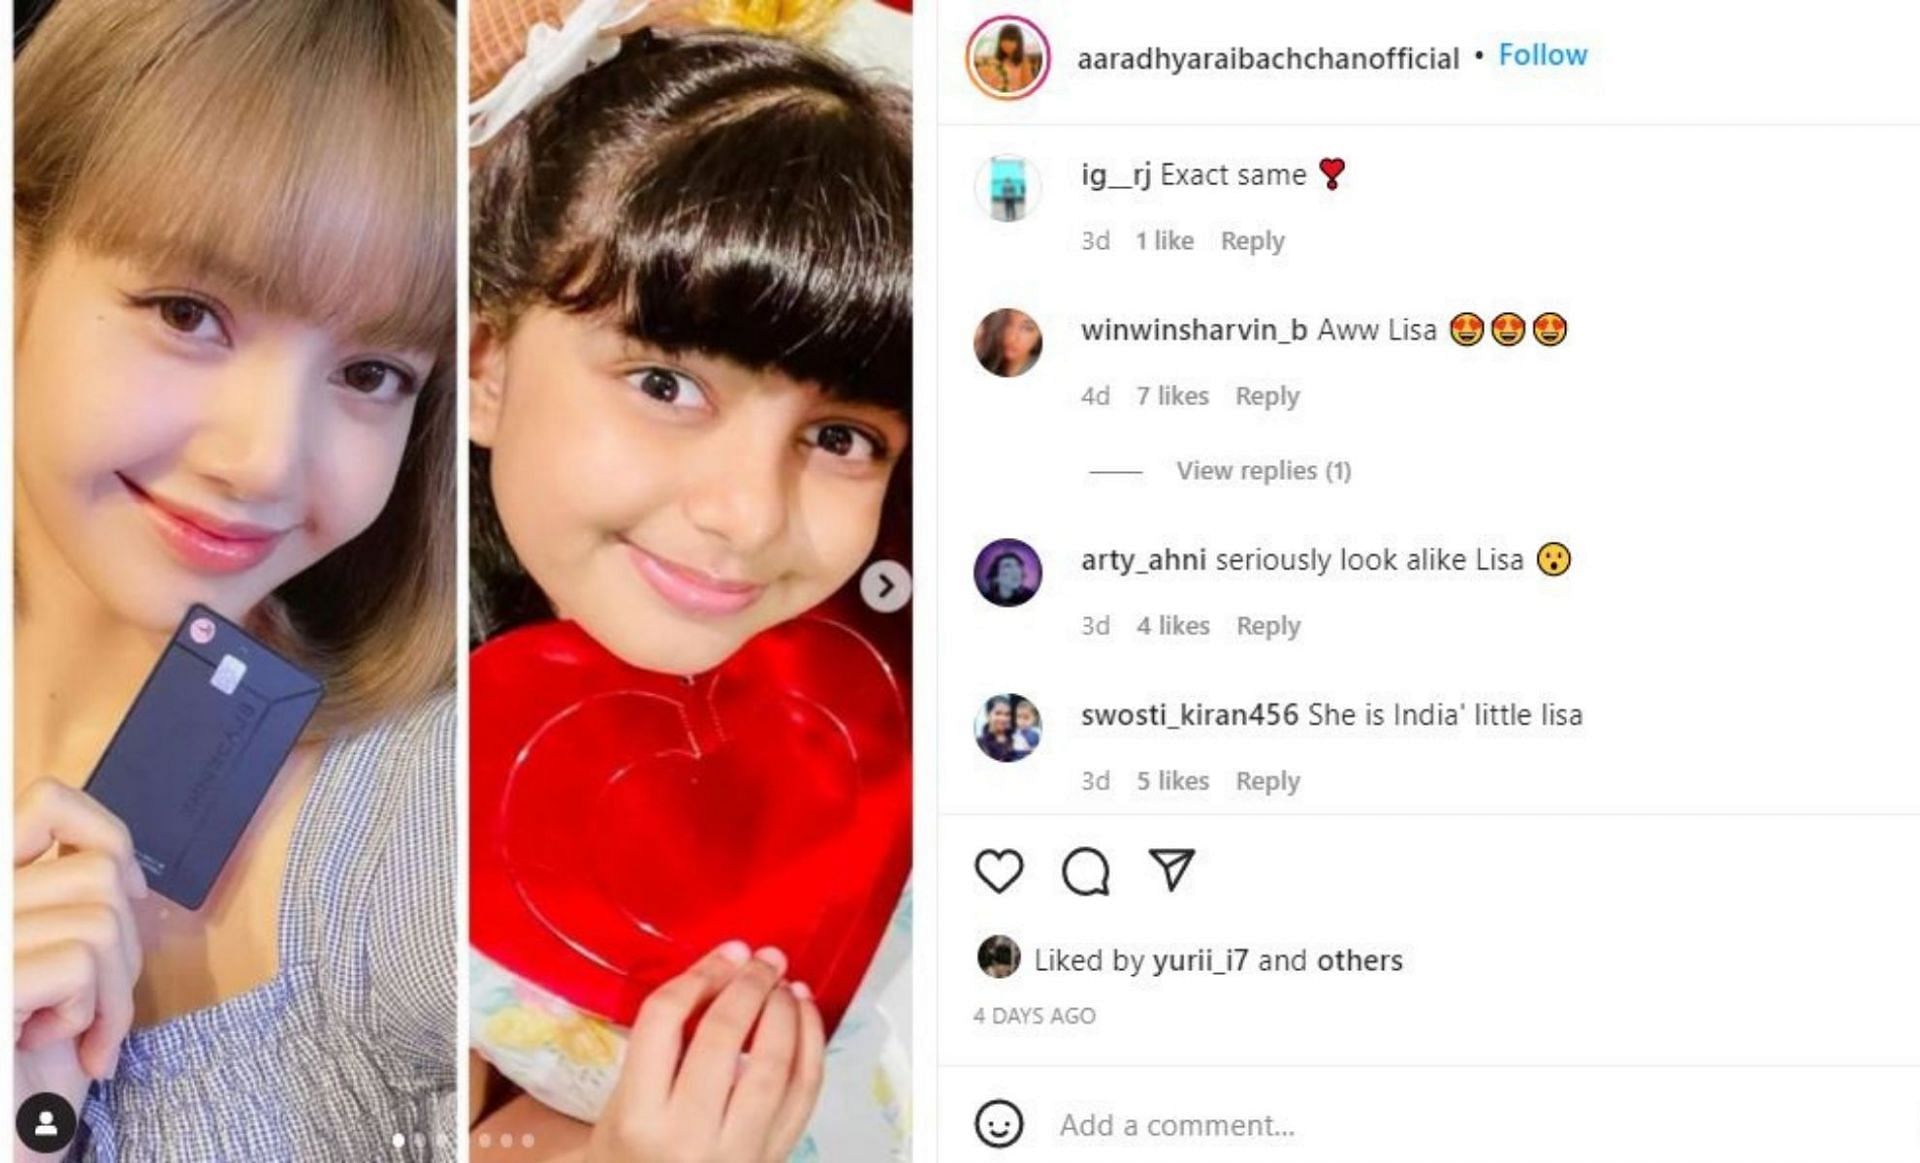 Comments under the collage post (Screenshot via @aaradhyaraibachchanofficial/Instagram)